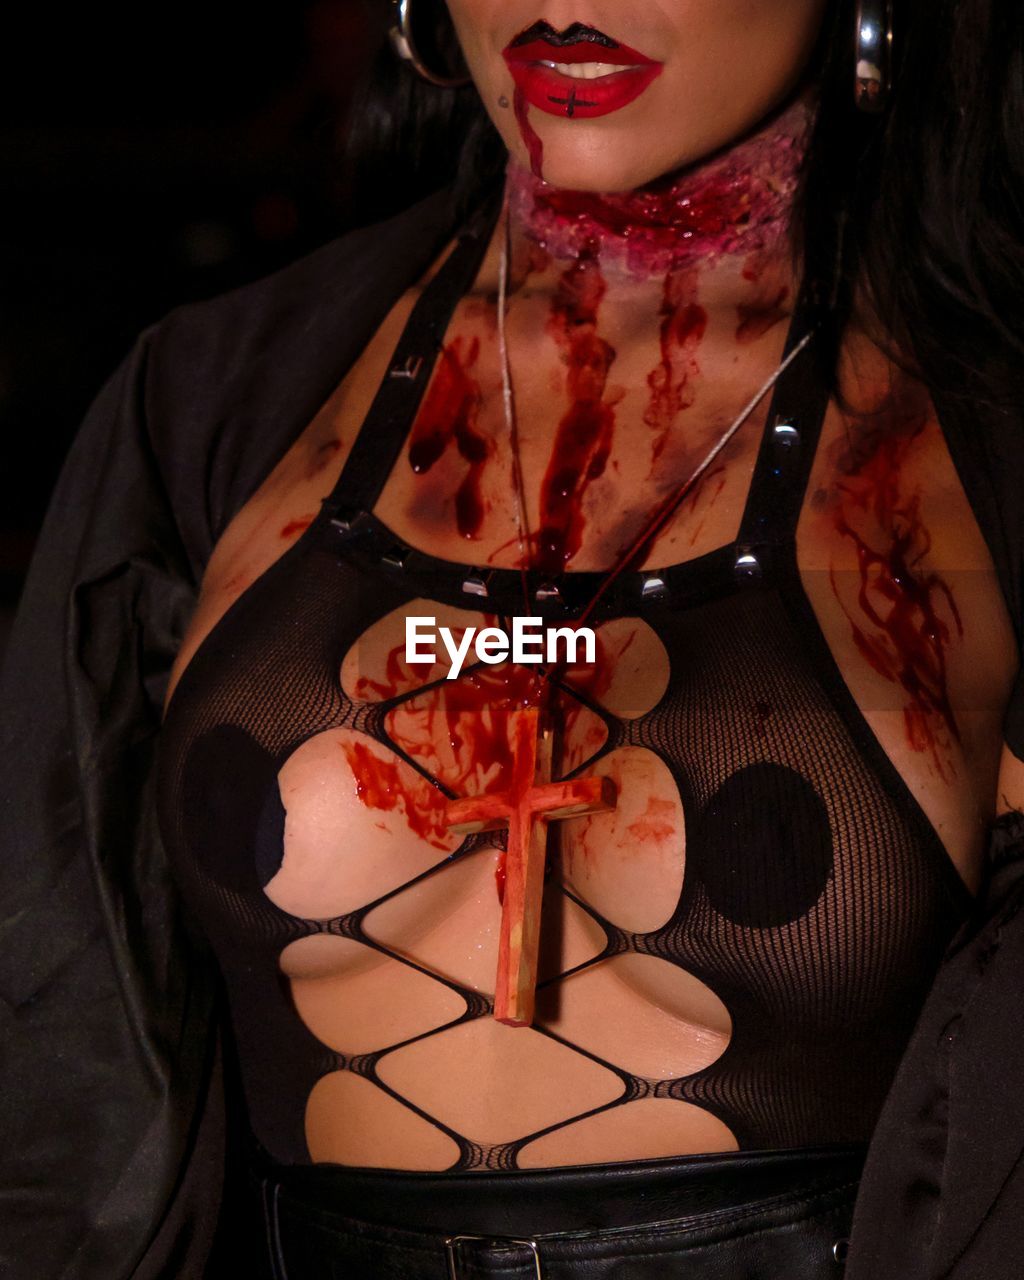 women, one person, adult, blood, flesh, halloween, portrait, clothing, spooky, female, indoors, young adult, make-up, fashion, horror, fear, front view, person, night, dark, evil, black, red, human mouth, looking at camera, celebration